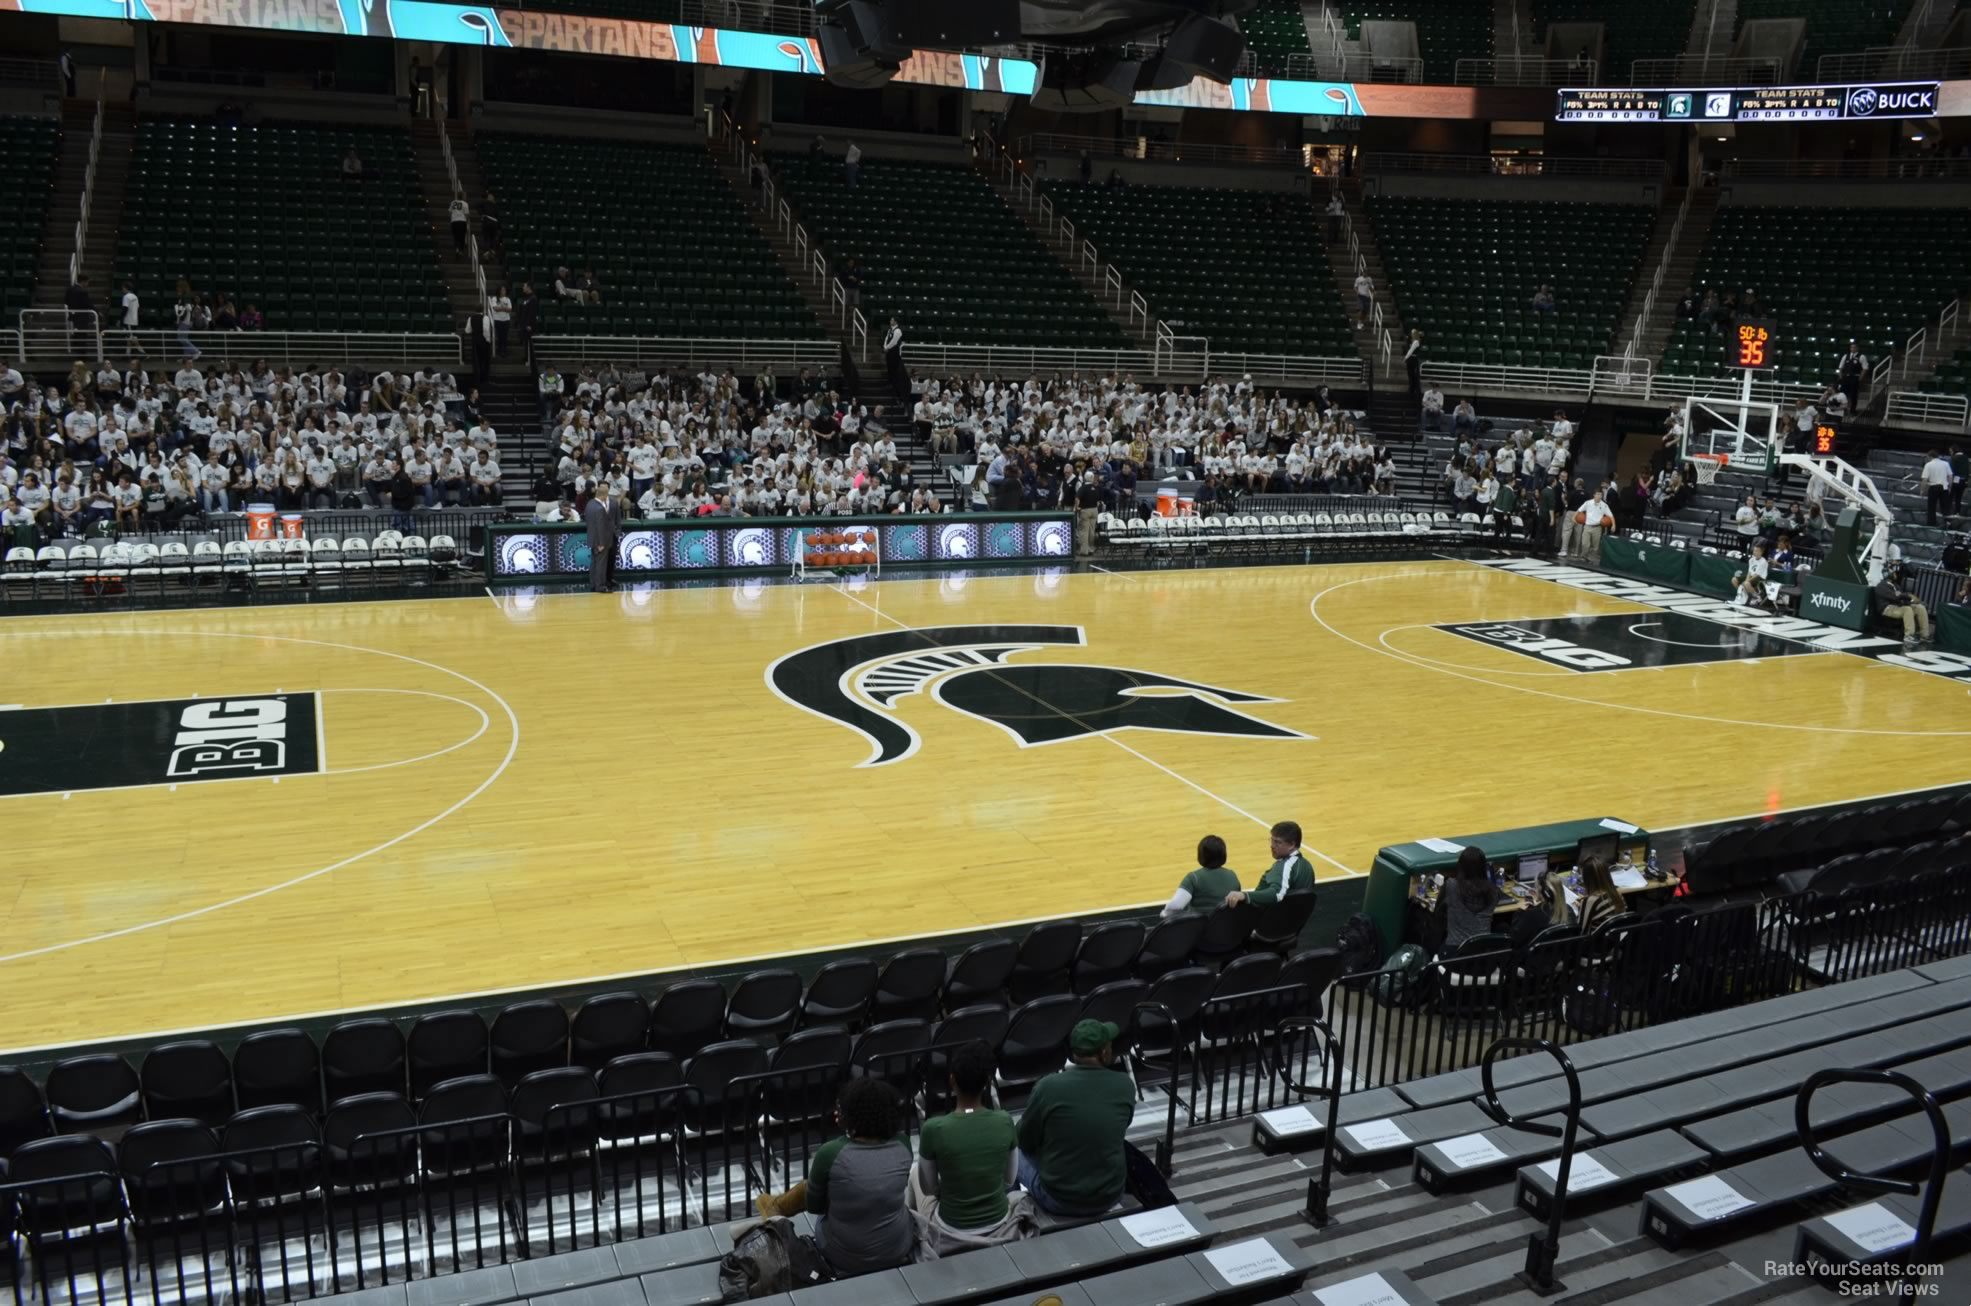 section 129, row 13 seat view  - breslin center